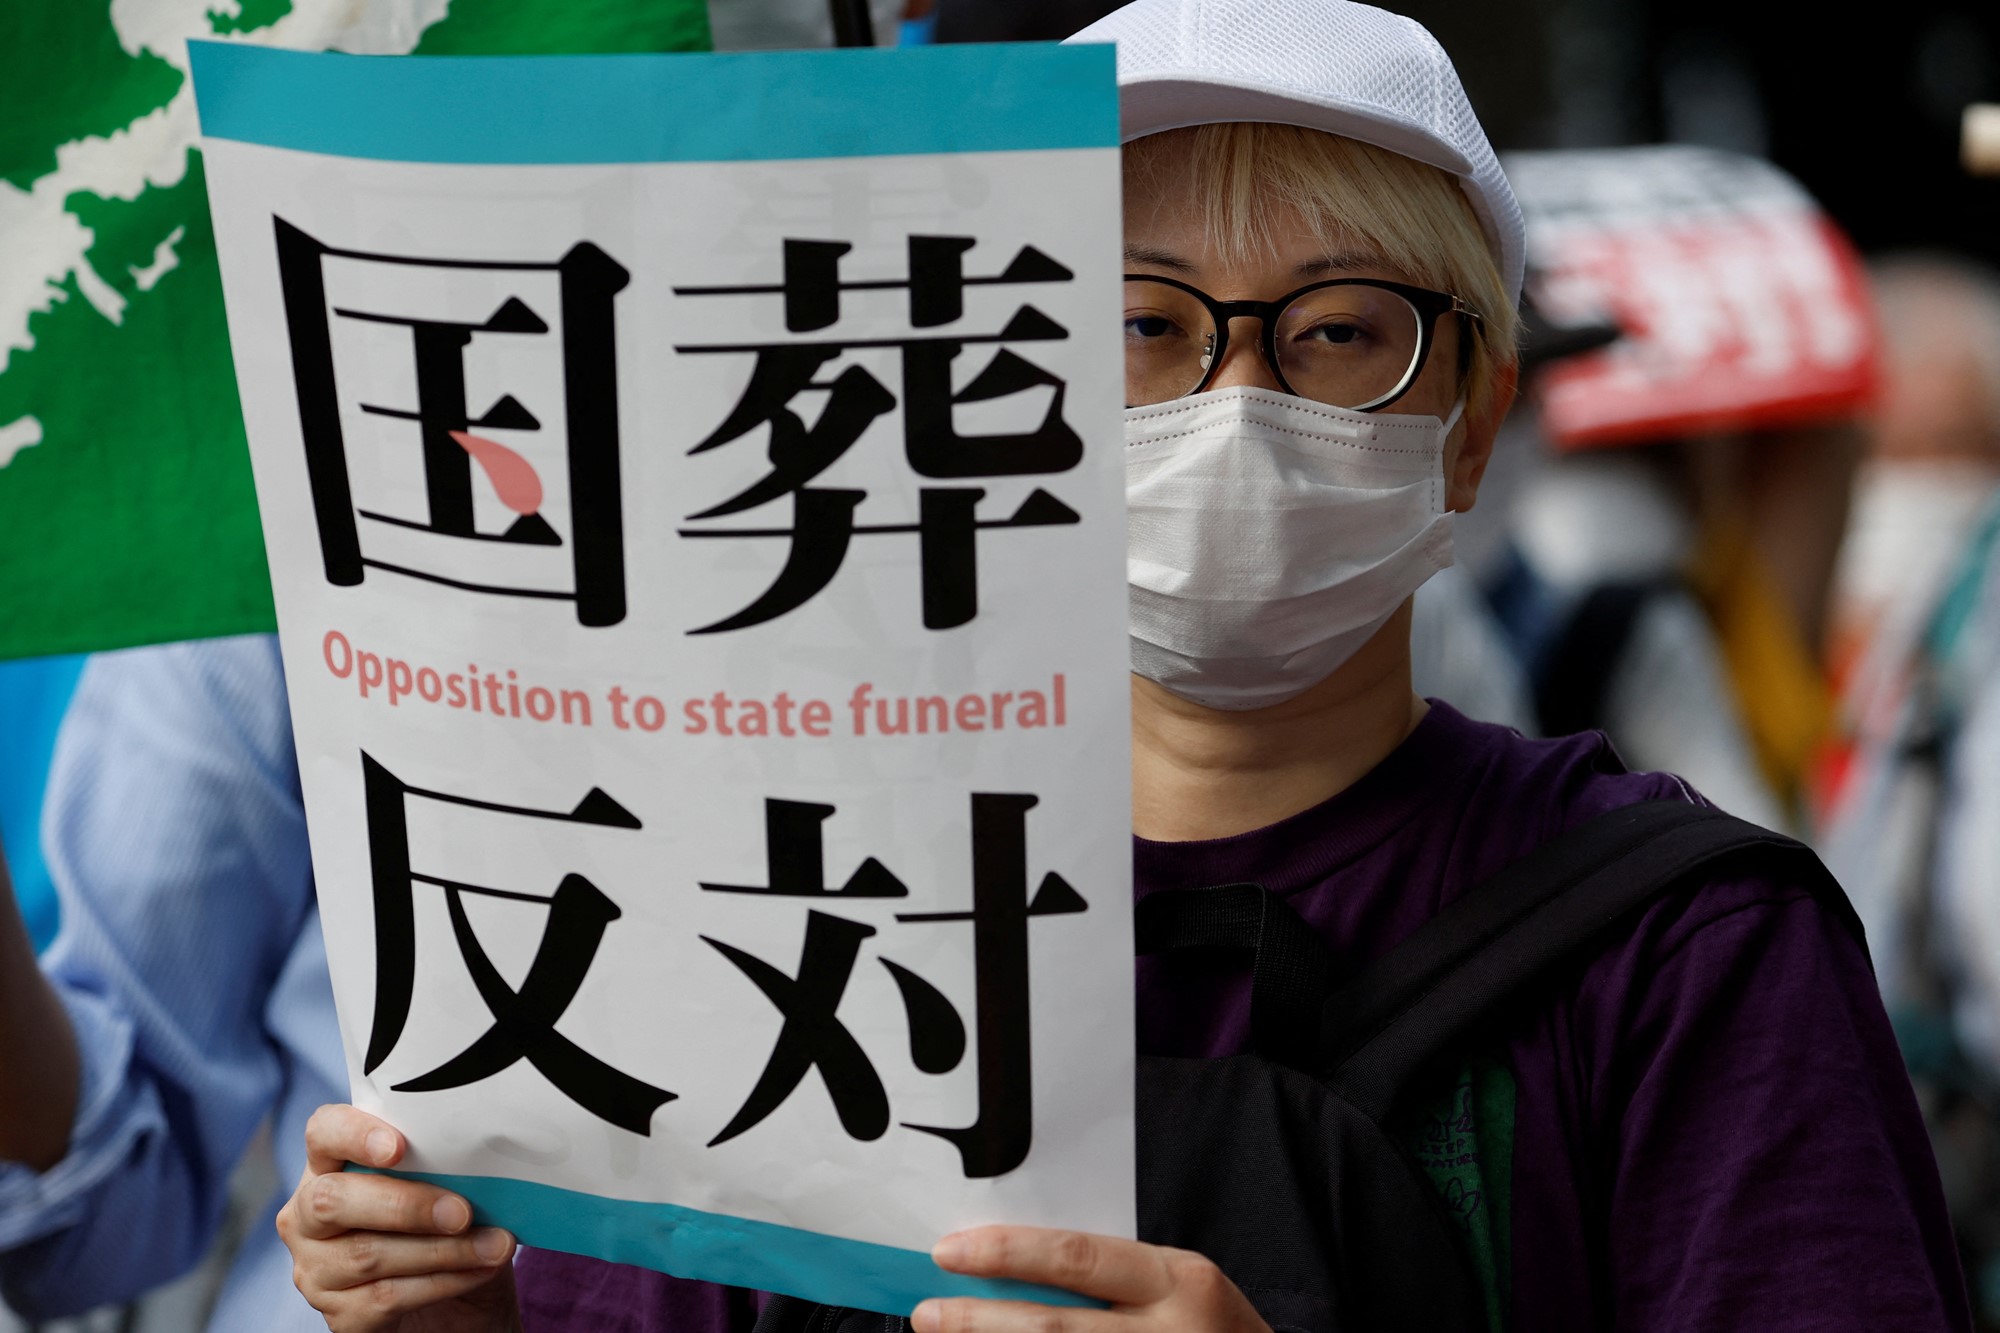 Protesters attend a rally outside the parliament building against Japan's state funeral for former Prime Minister Shinzo Abe